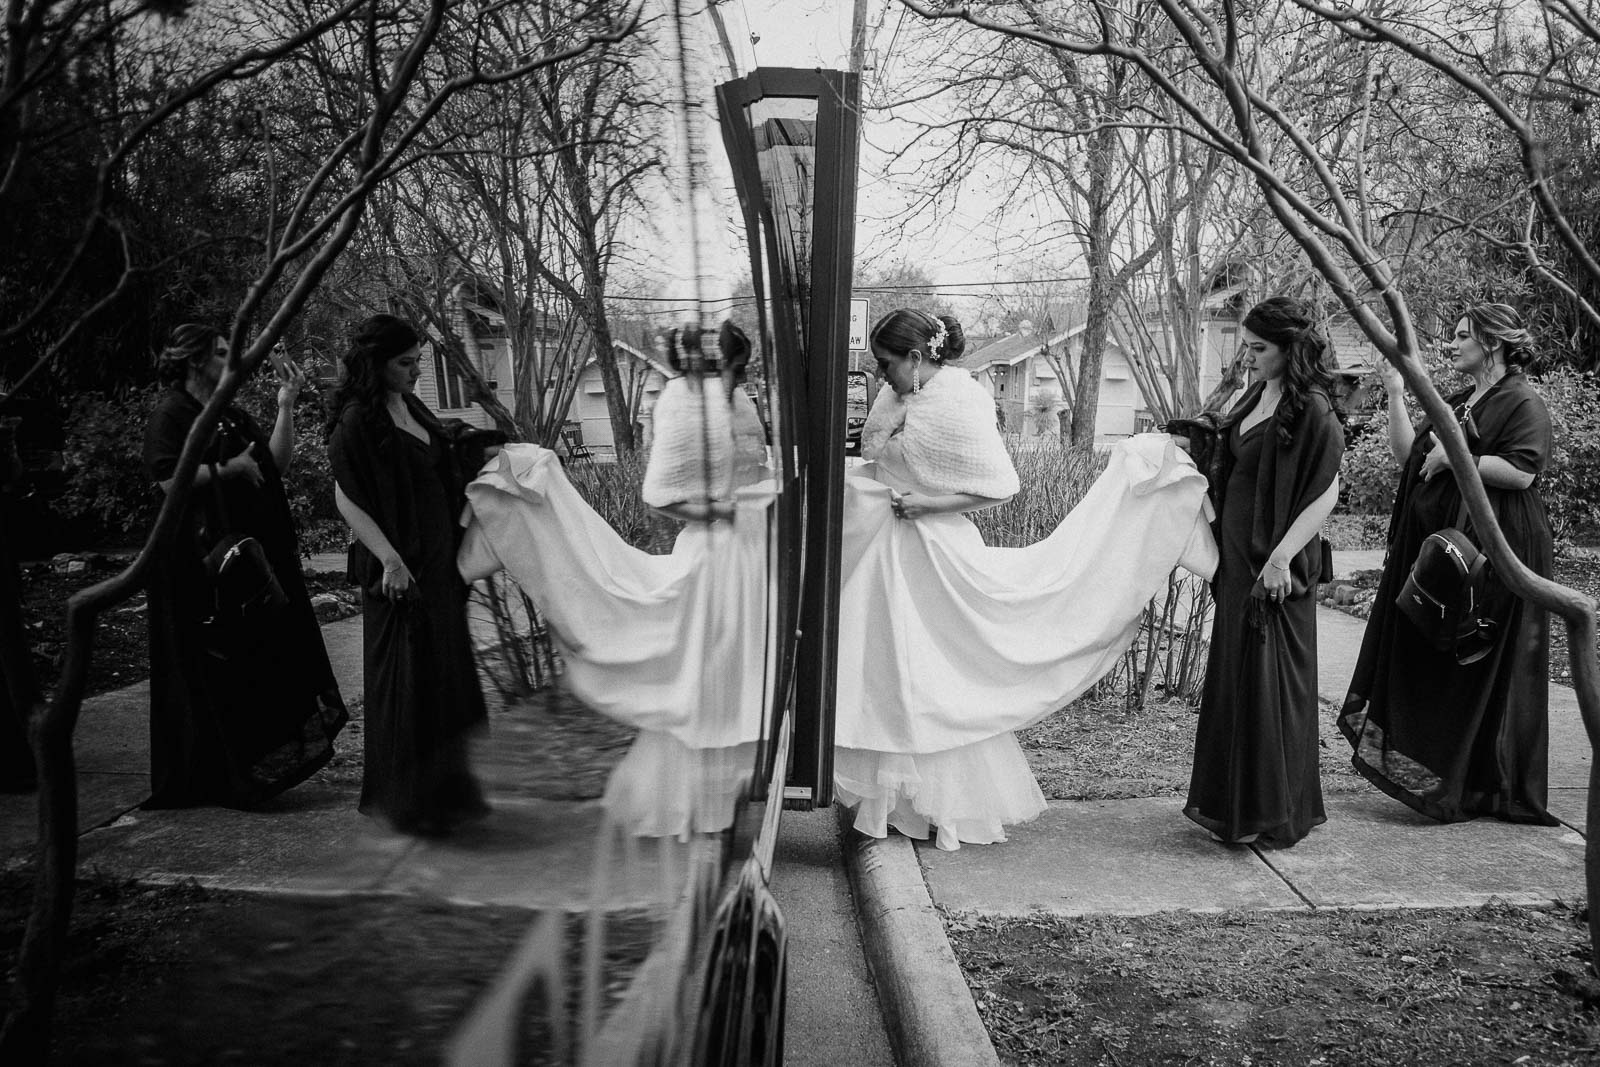 San Antonio Bride steps onto limousine bus on her wedding day captured with a Leica M10 and summilux 35mm lens M0945 L1009744